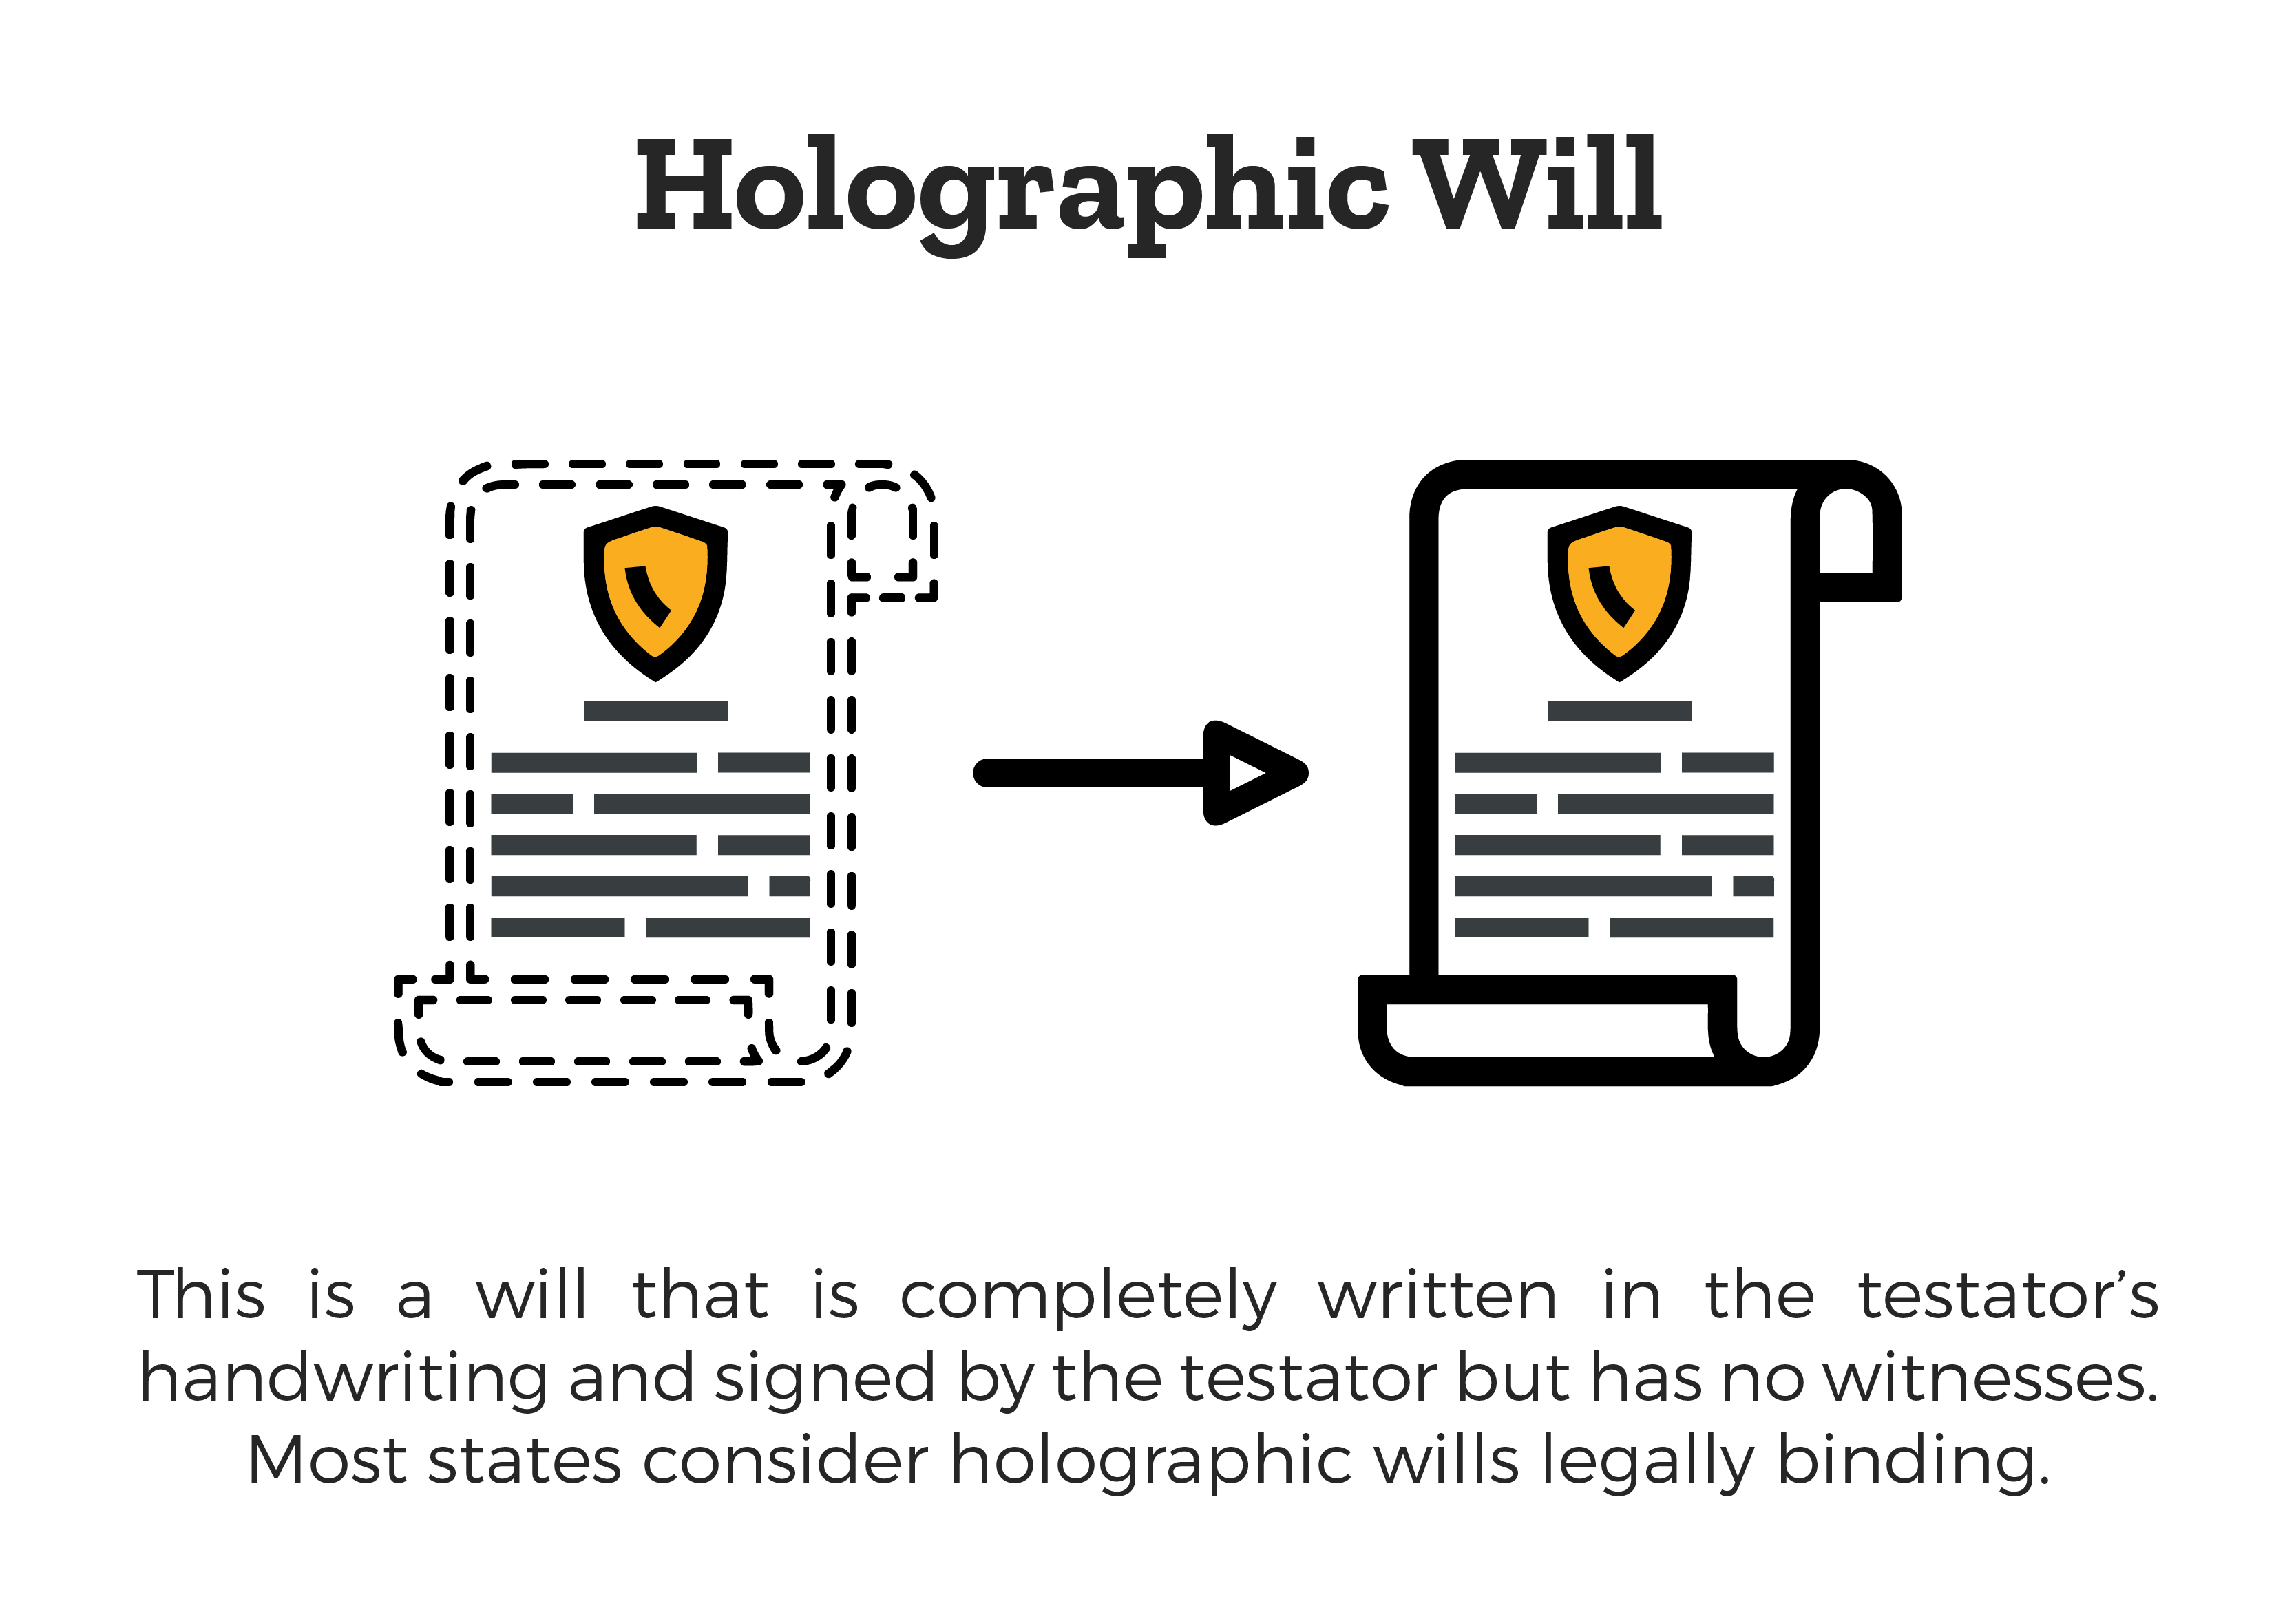 What is a holographic will? This is a will that is completely written in the testator's handwriting and signed by testator but has no witnesses. Most states consider holographic wills legally binding.